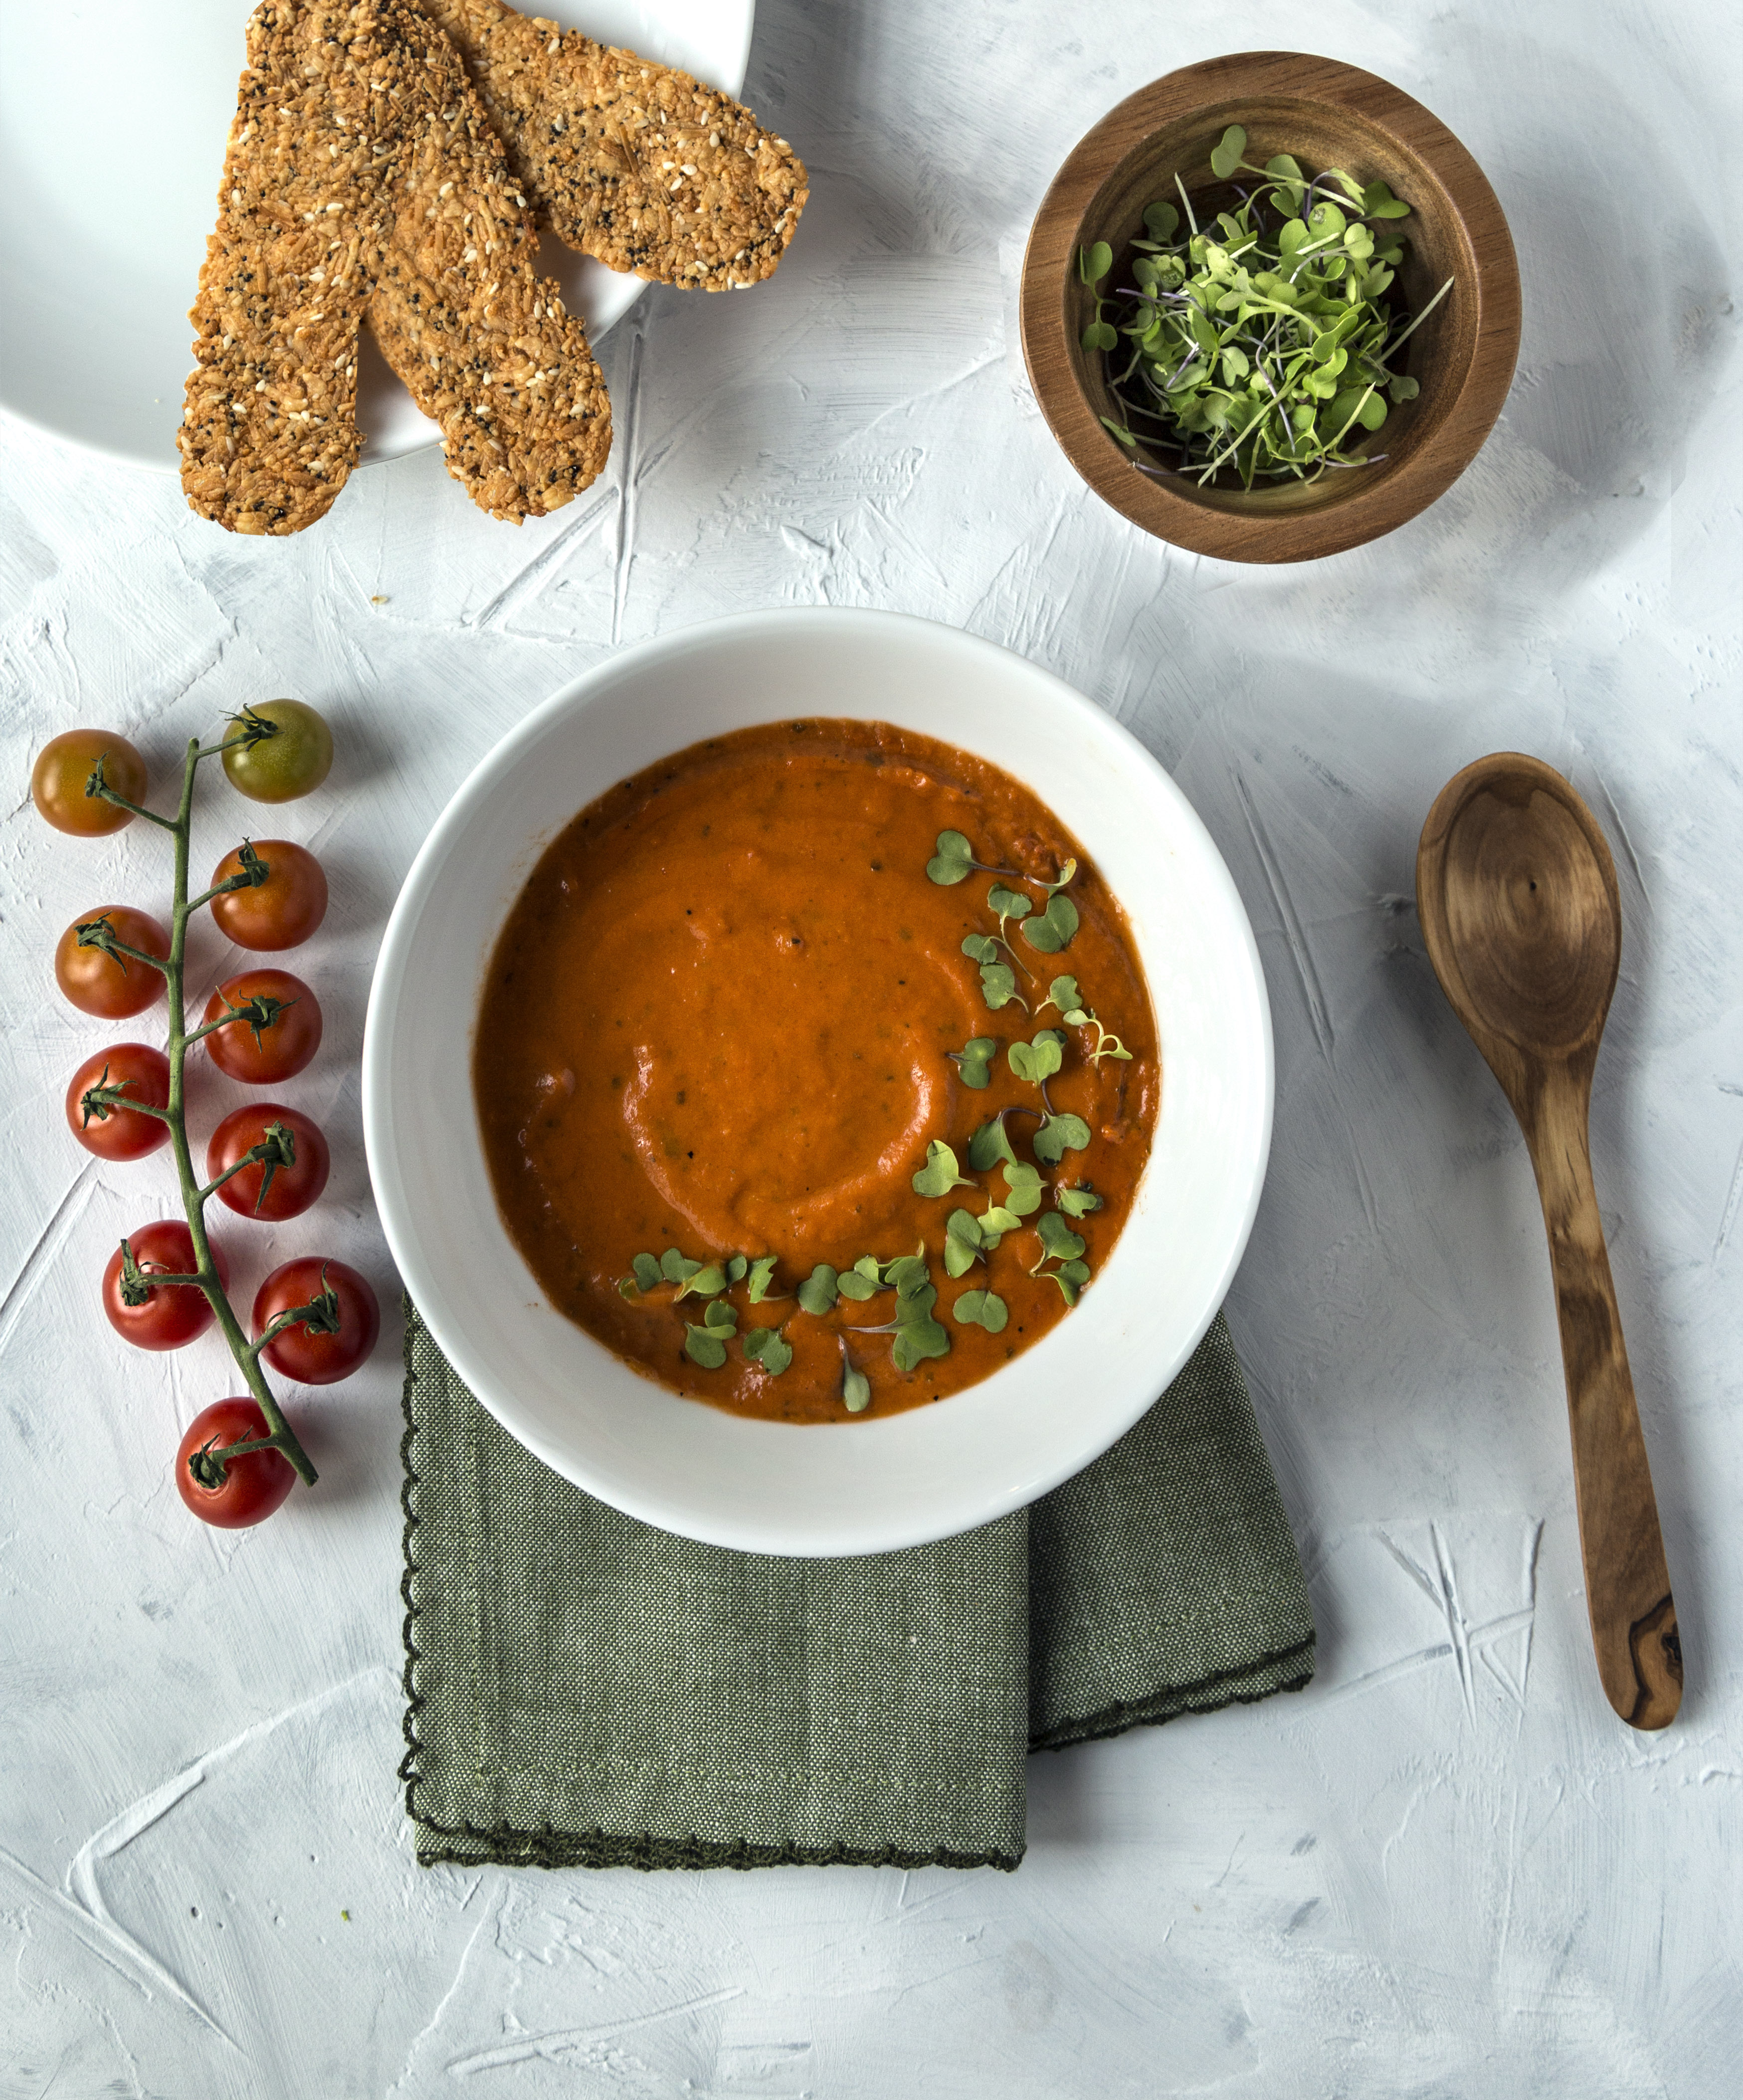 Roasted Tomato Soup {Diary-Free!} - FeelGoodFoodie